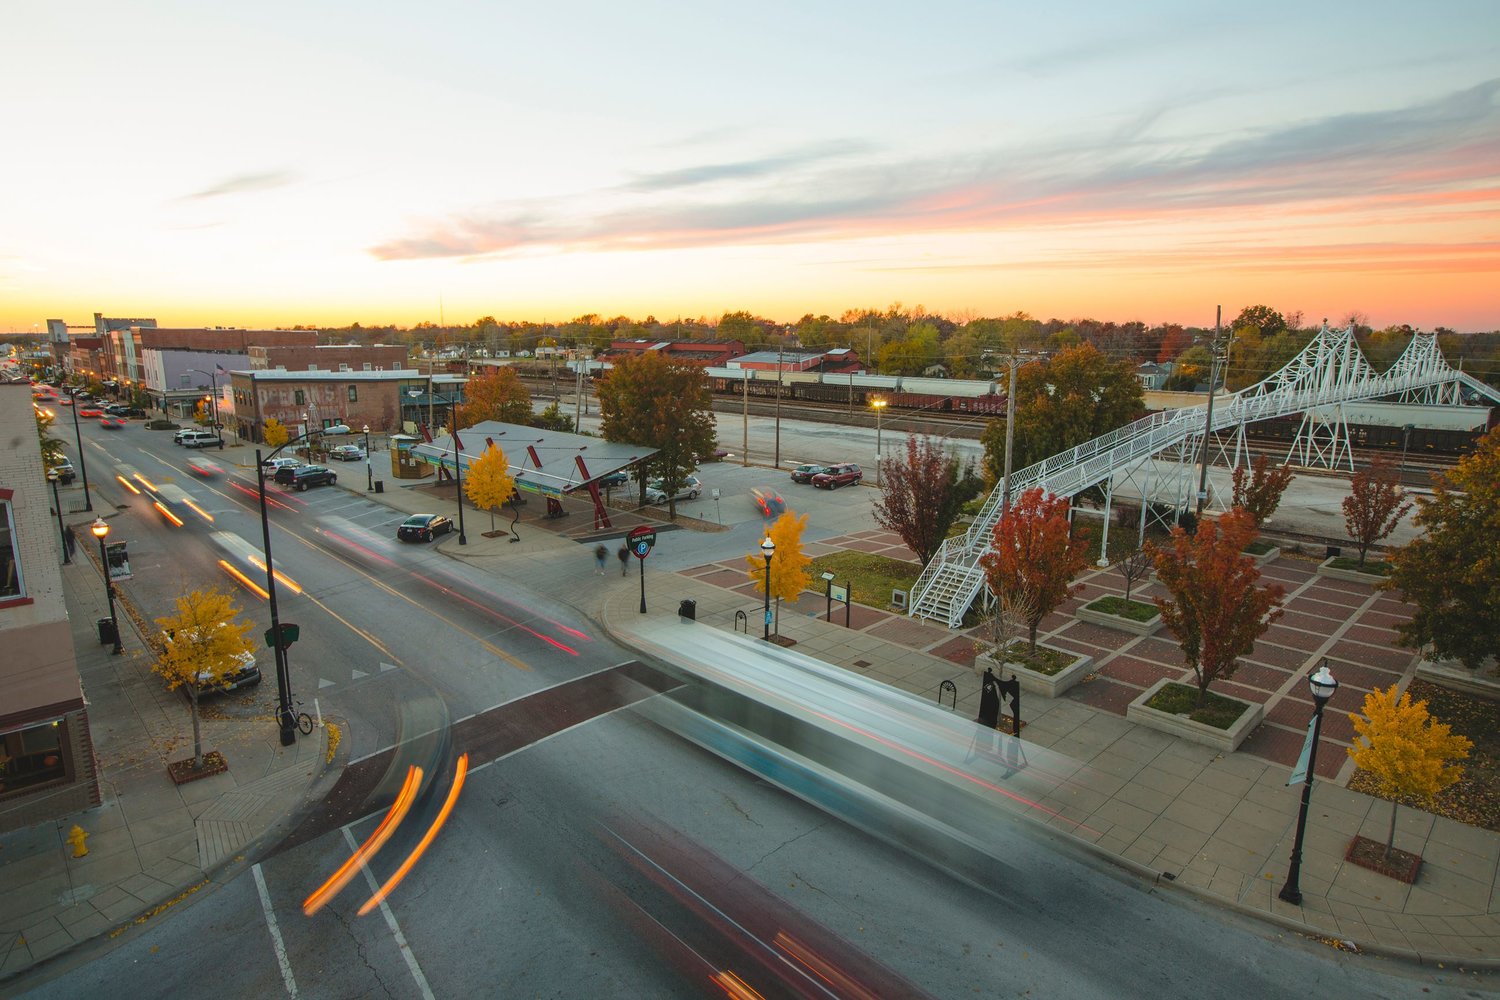 C-Street improvements, paid for through tax increment financing, are a quality-of-place initiative that aims to bring visitors to the historic district.